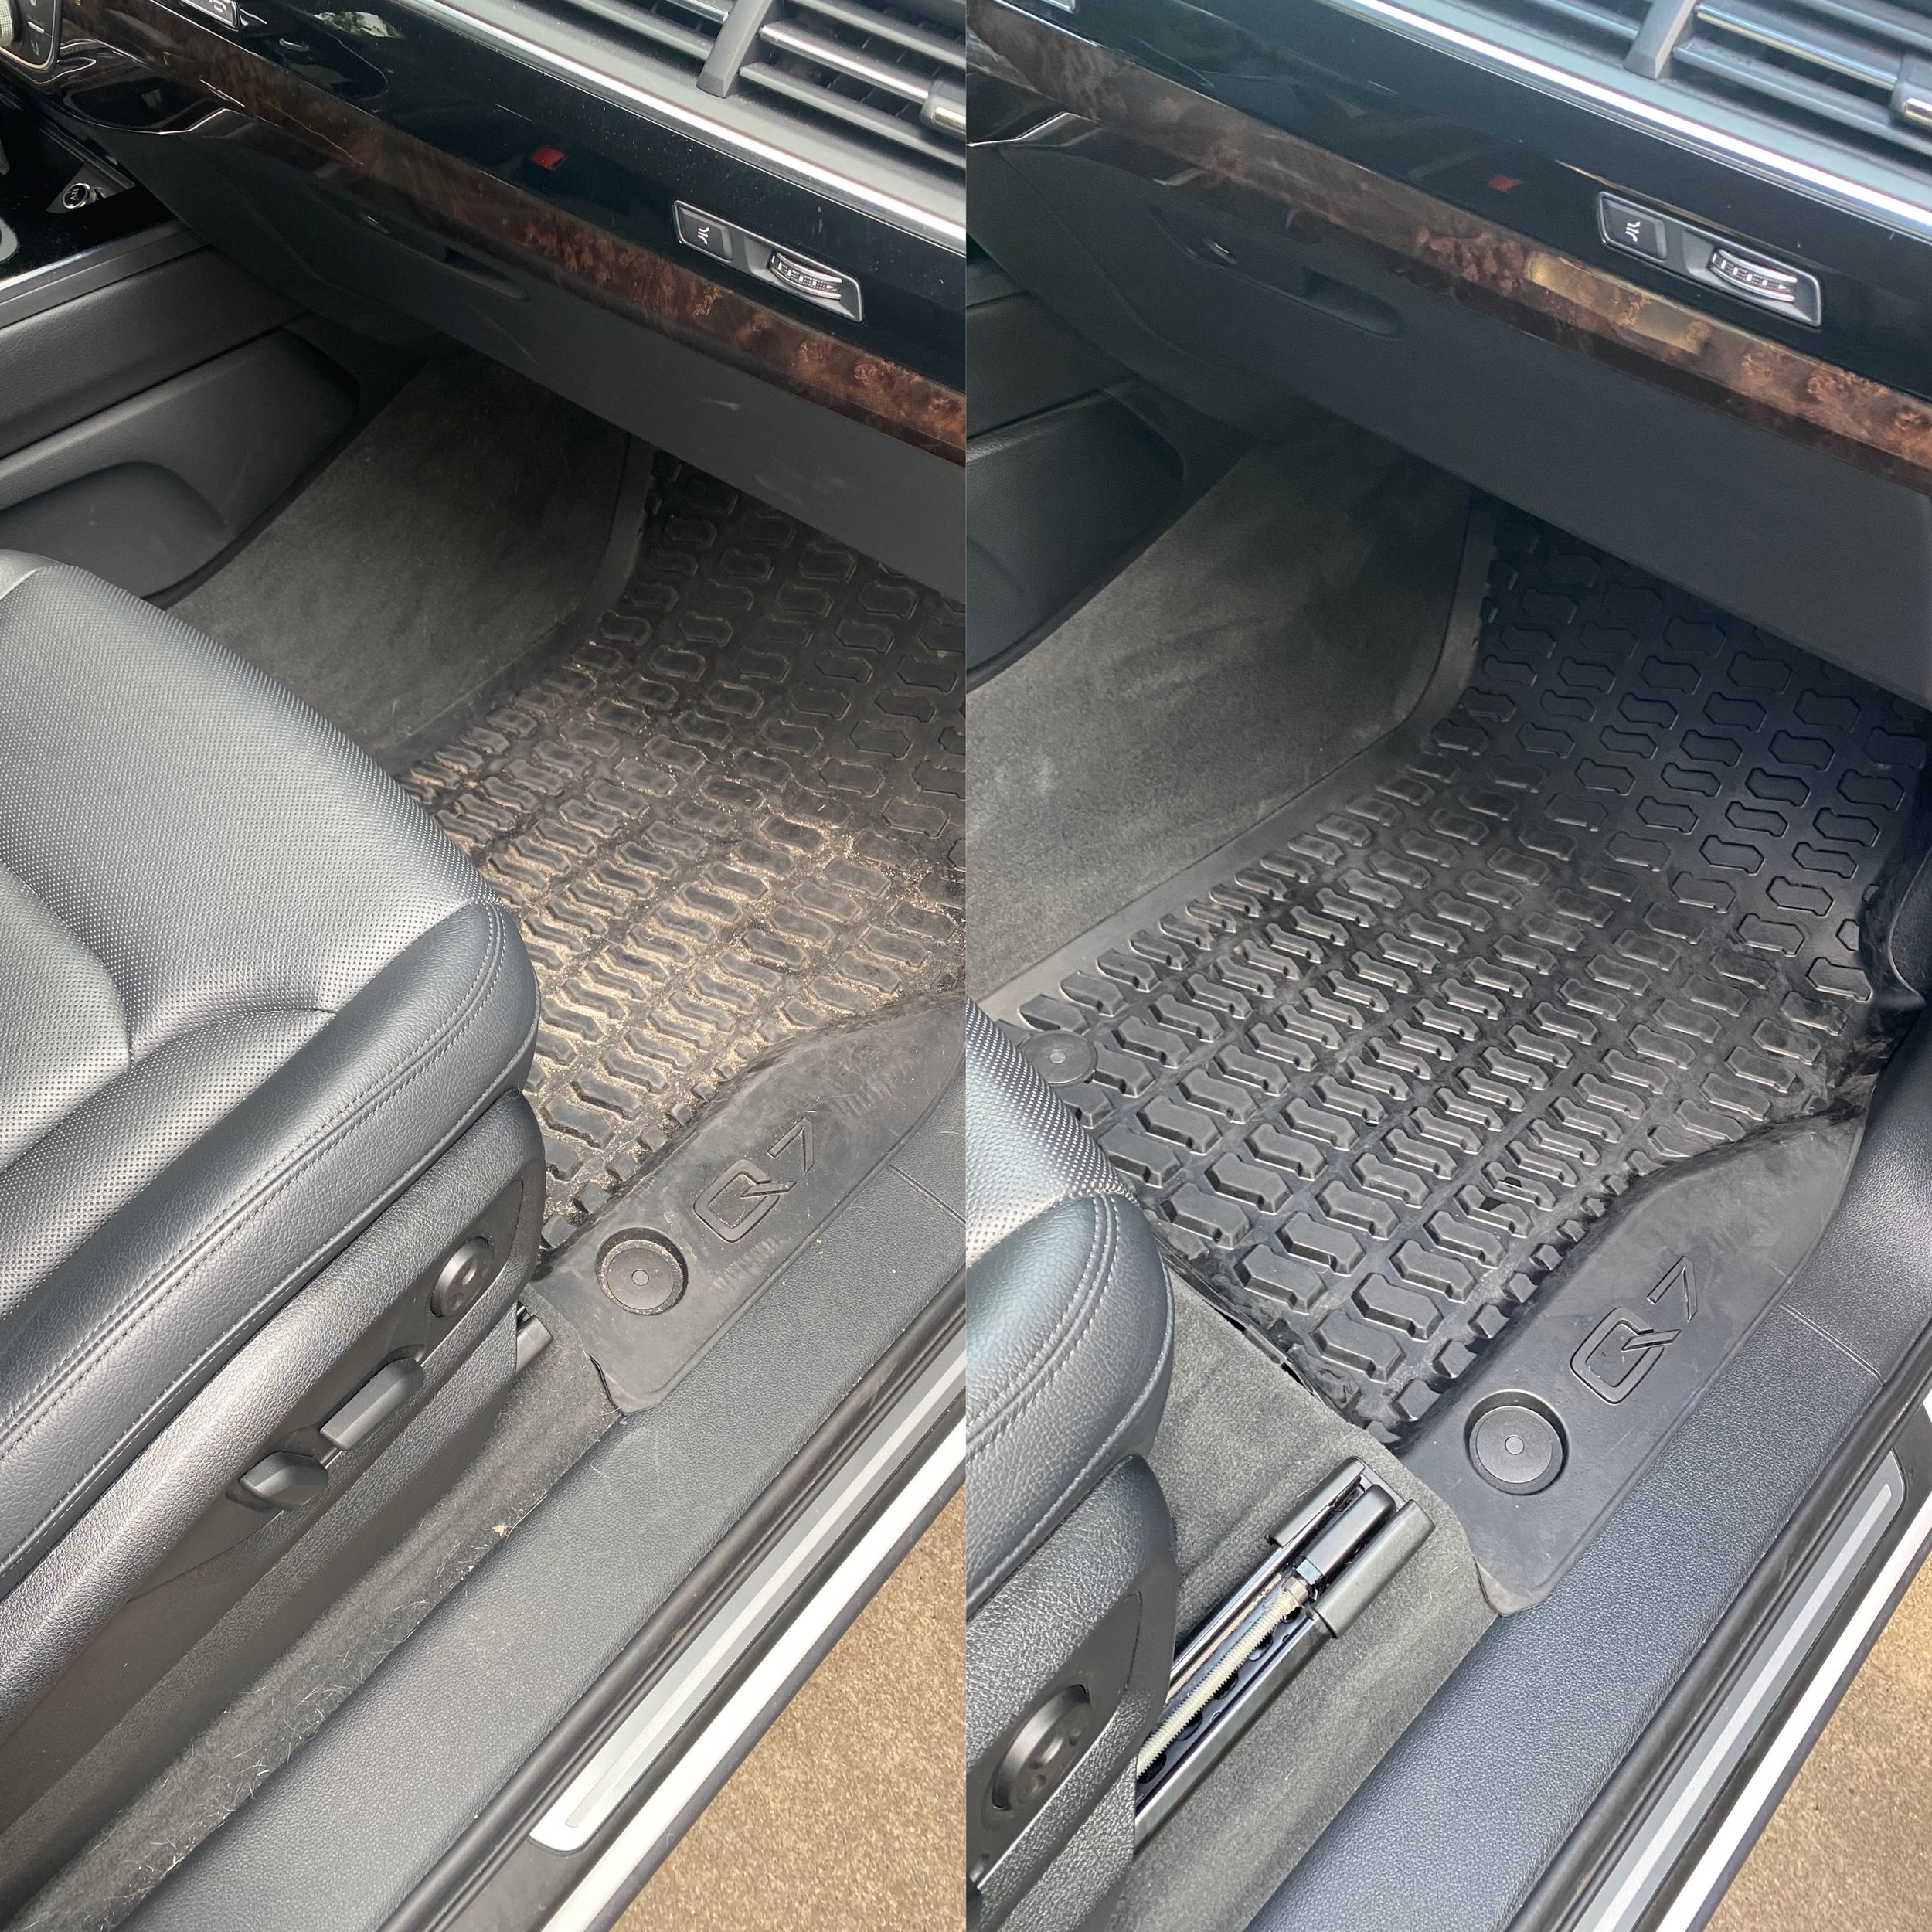 Full Car Interior Cleaning in Dallas - Sweet's Auto Detailing